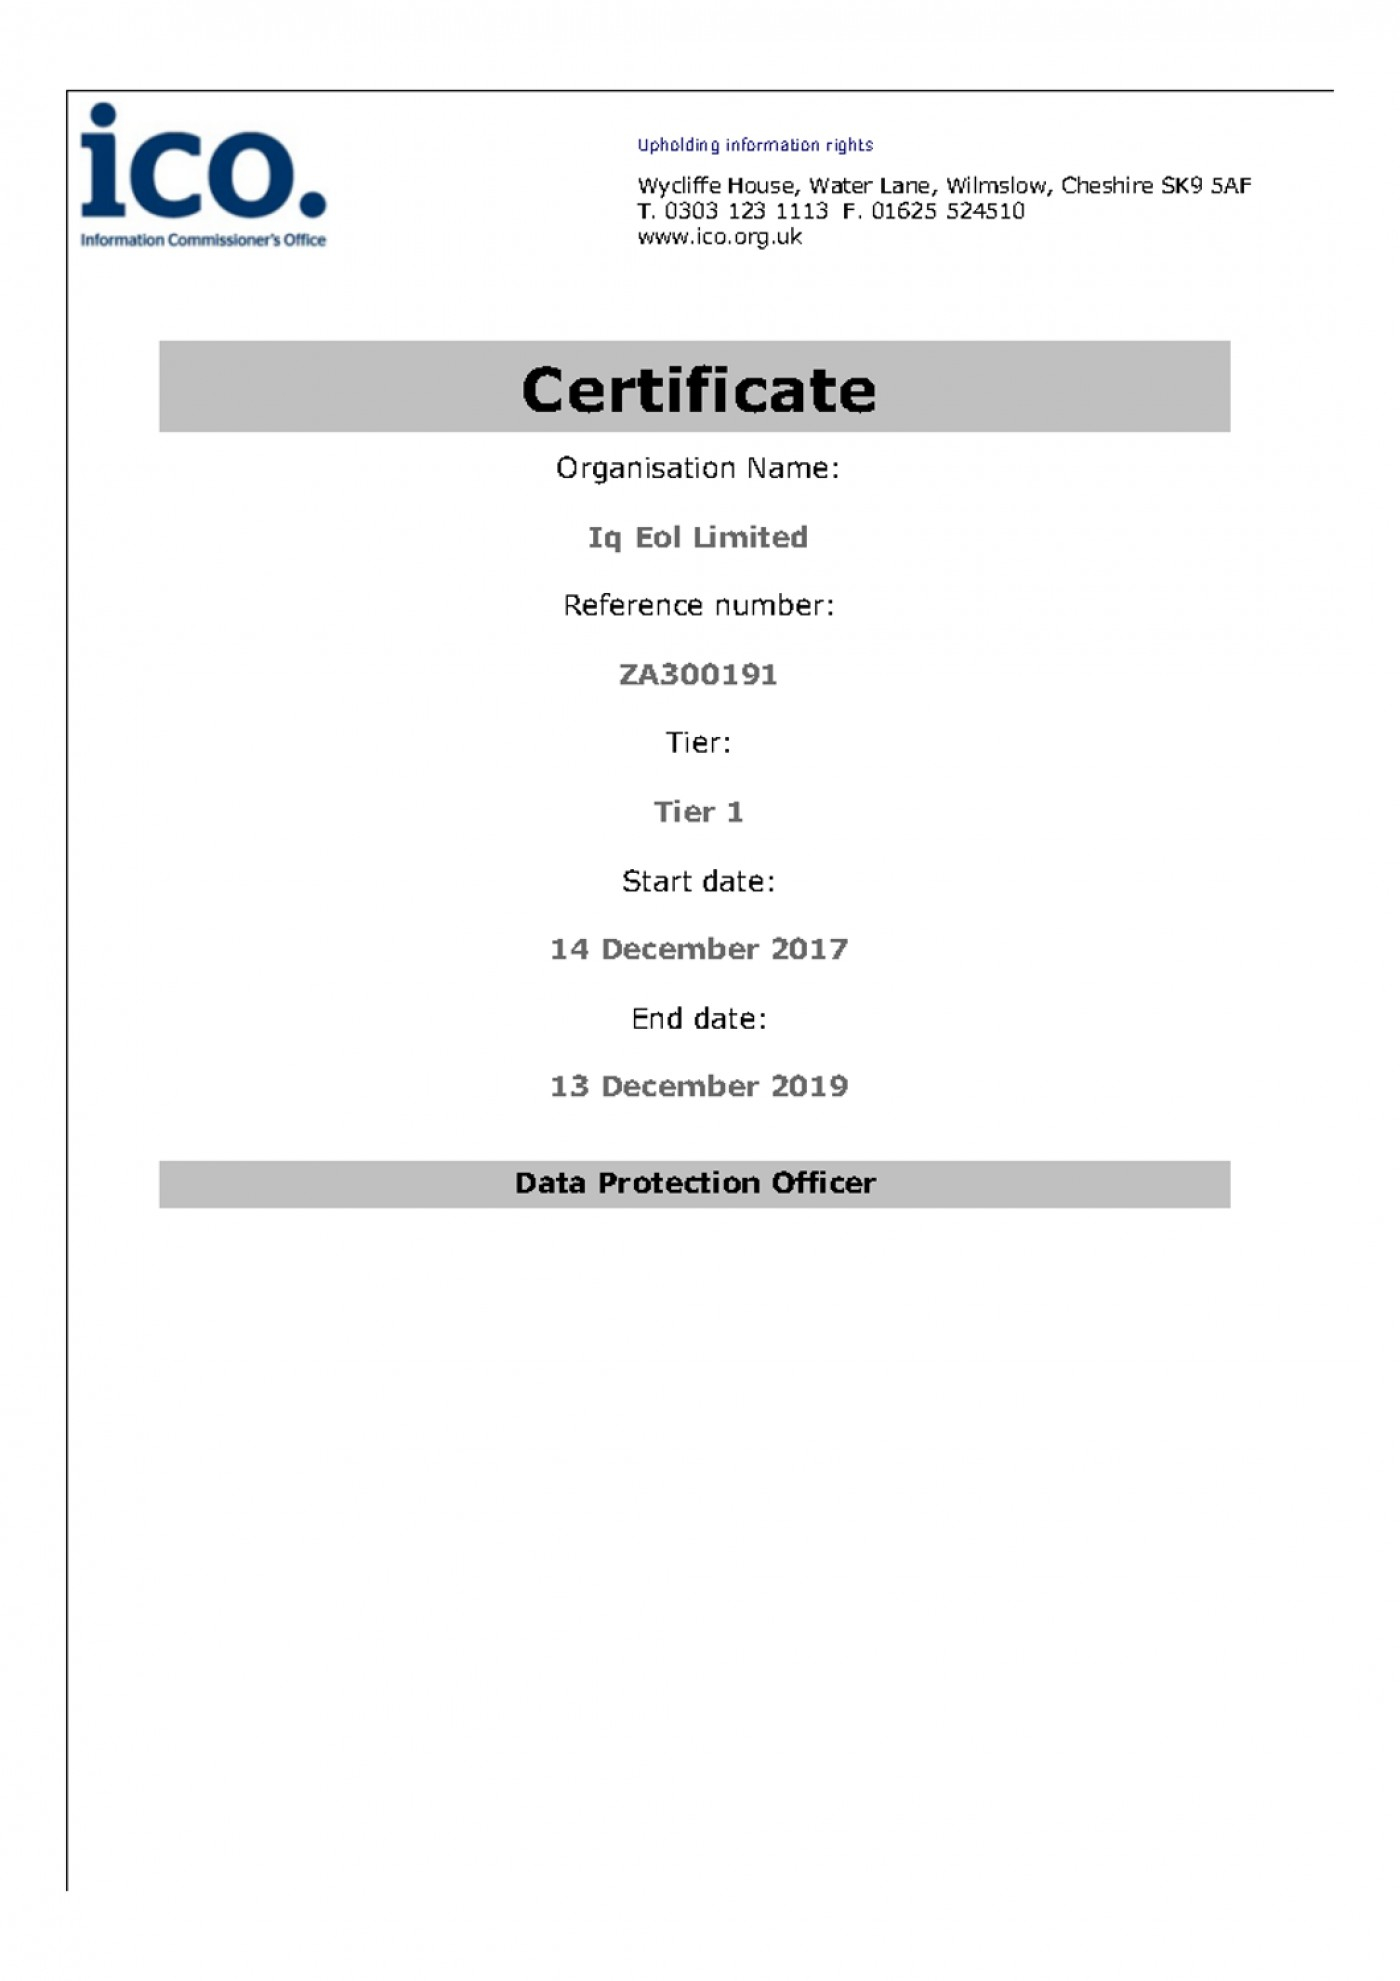 038 Certificate Of Destruction Template Ico Exceptional Pertaining To Iq Certificate Template